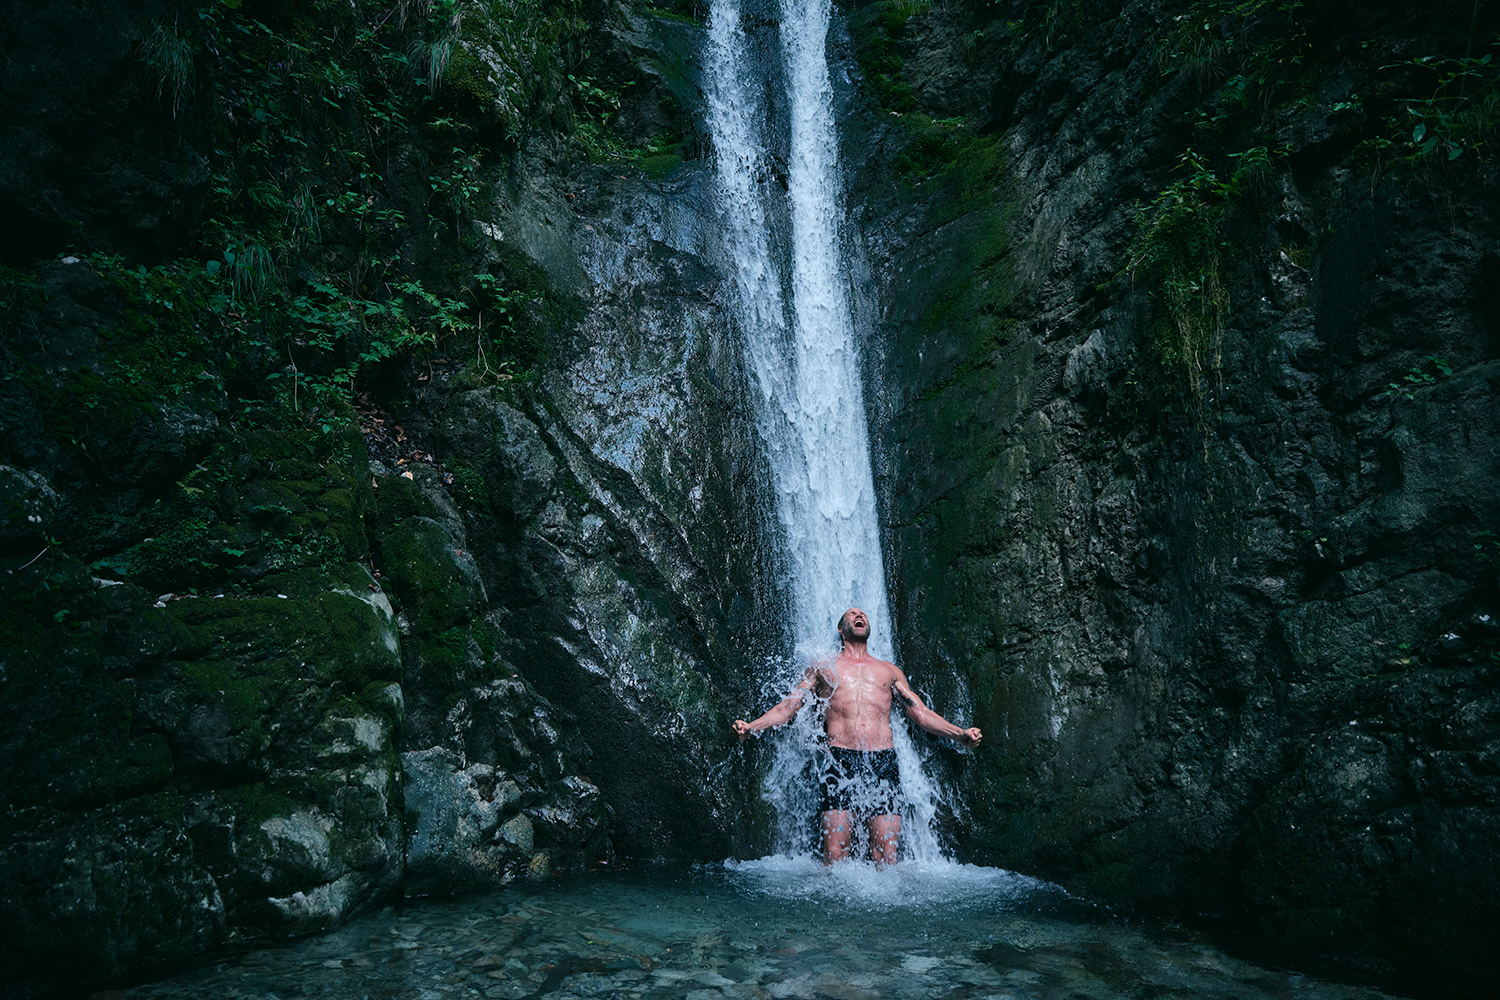 Man bathing under a freezing waterfall and screaming for joy